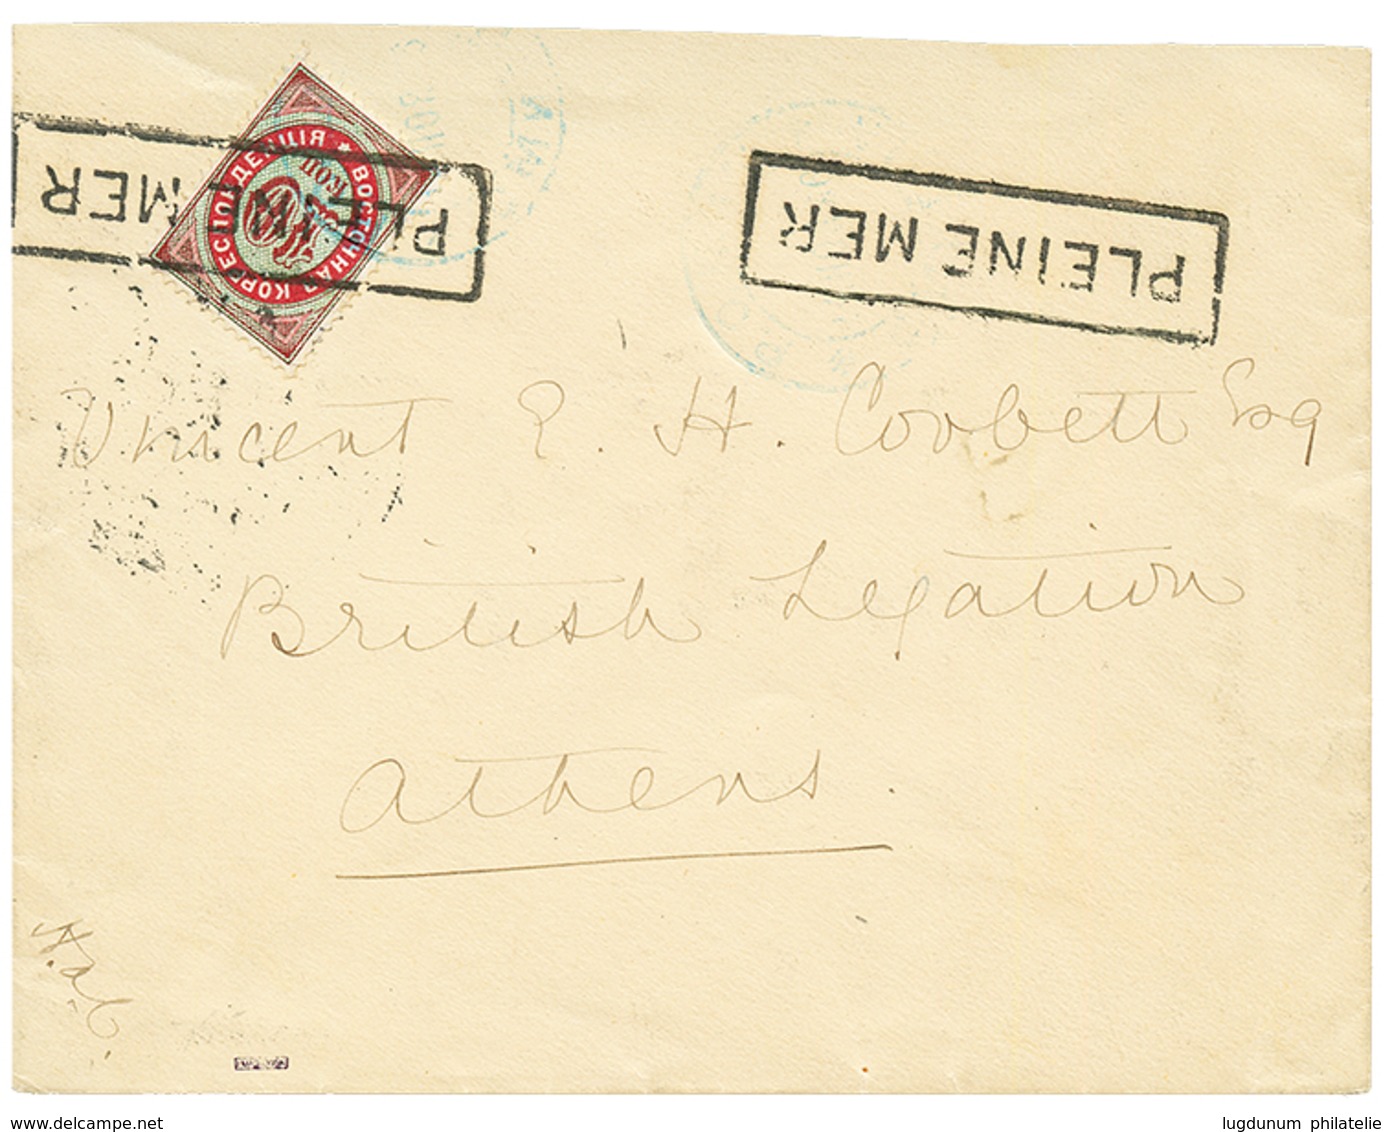 988 RUSSIAN LEVANT : 1894 10k Canc. Boxed PLEINE MER On Envelope From EGYPT To ATHENS (GRECE). Vvf. - Levant